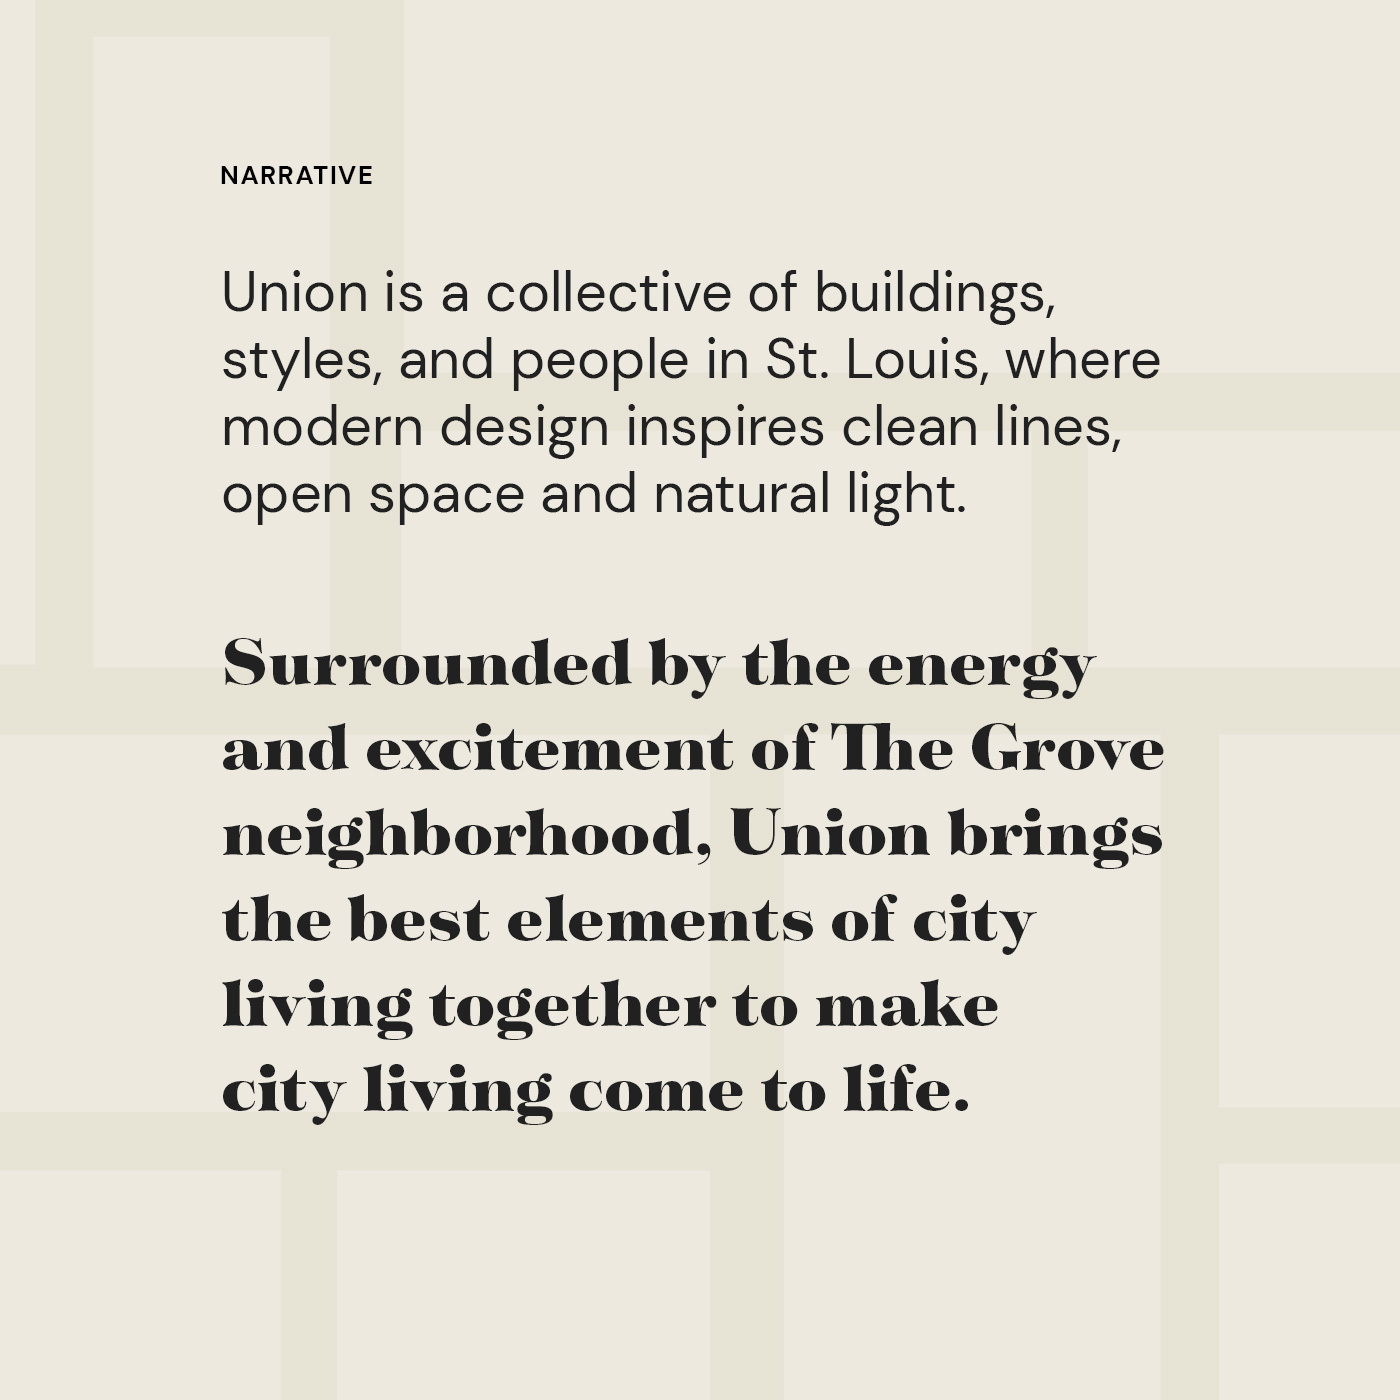 Union at the Grove brand narrative as part of the residential development branding. The text includes "Surrounded by the energy and excitement of The Grove neighborhood, Union brings the best elements of city living together to make city living come to life